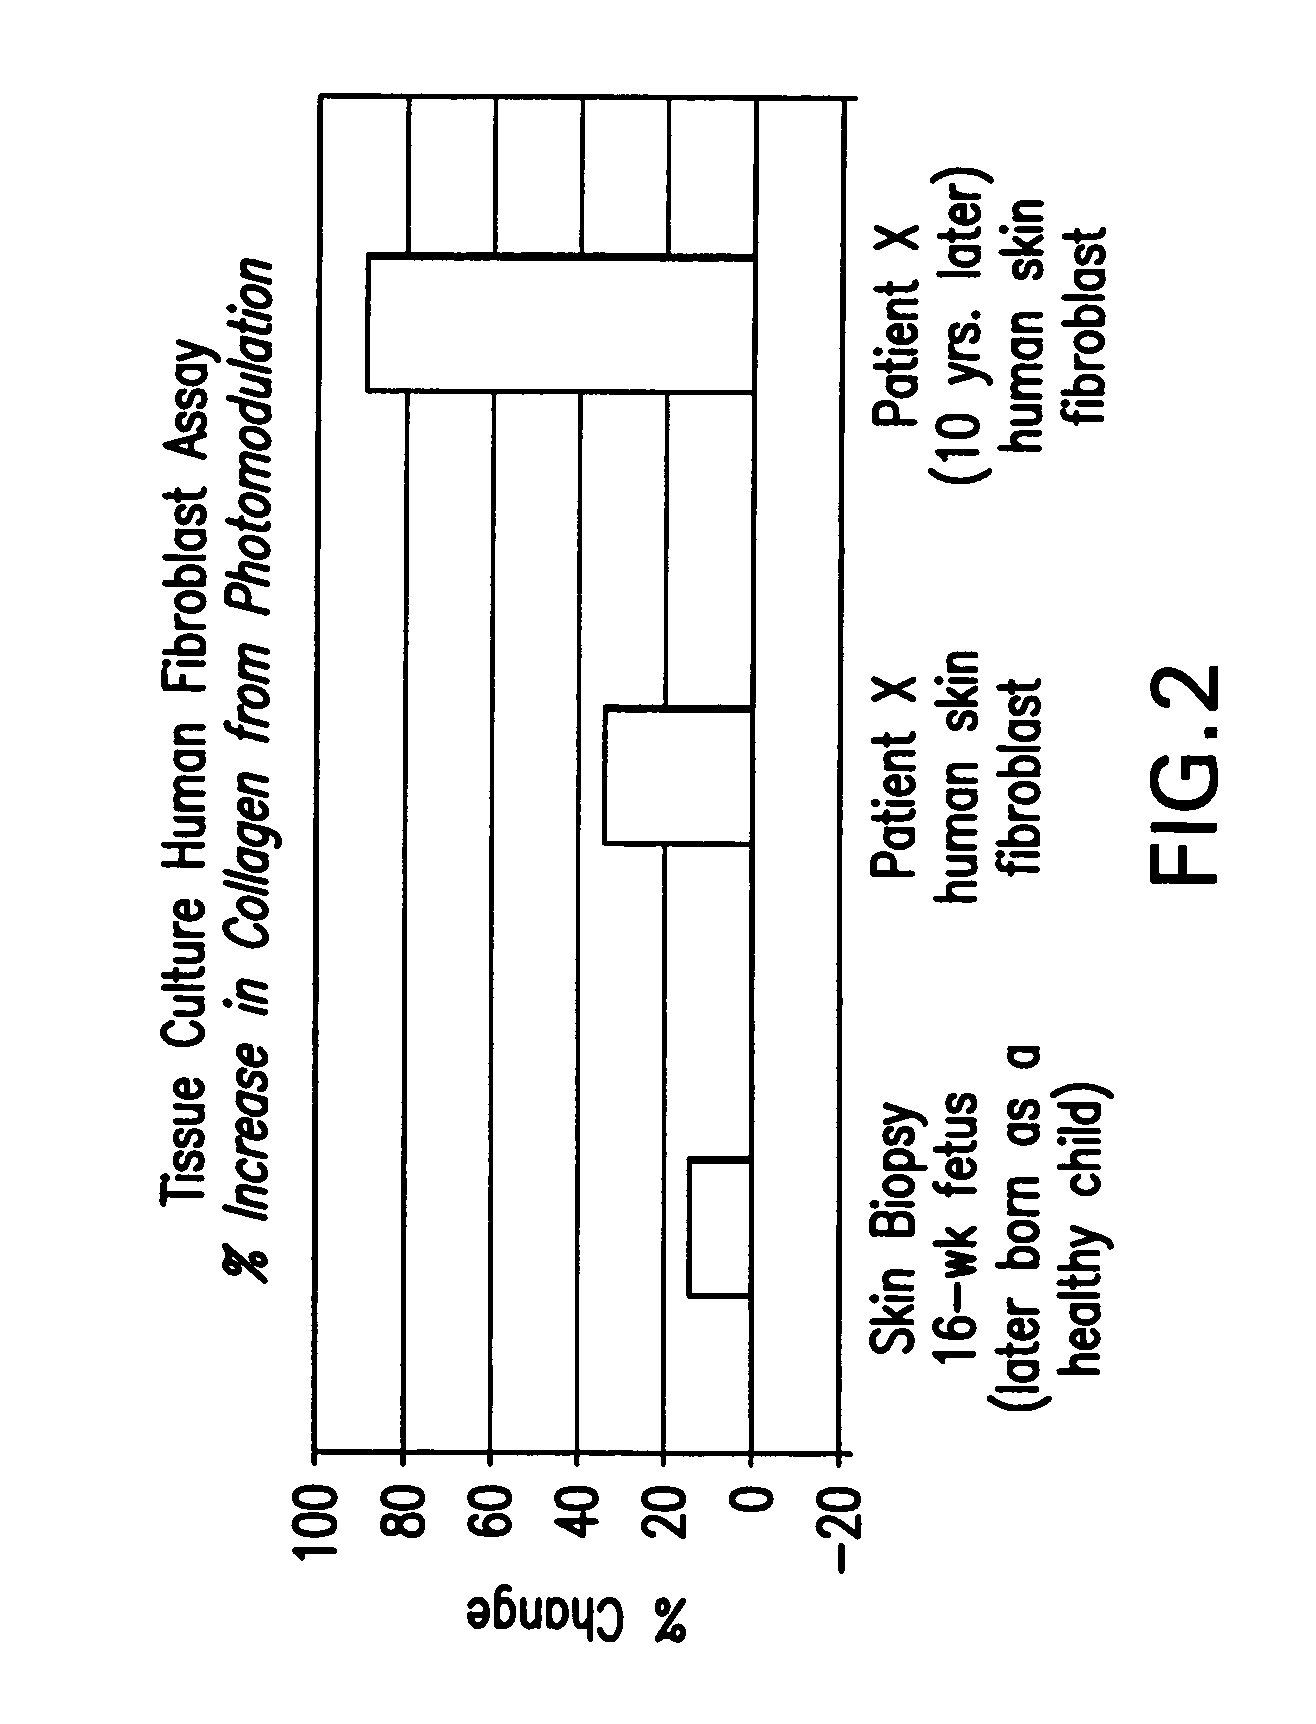 Photomodulation methods and devices for regulating cell proliferation and gene expression